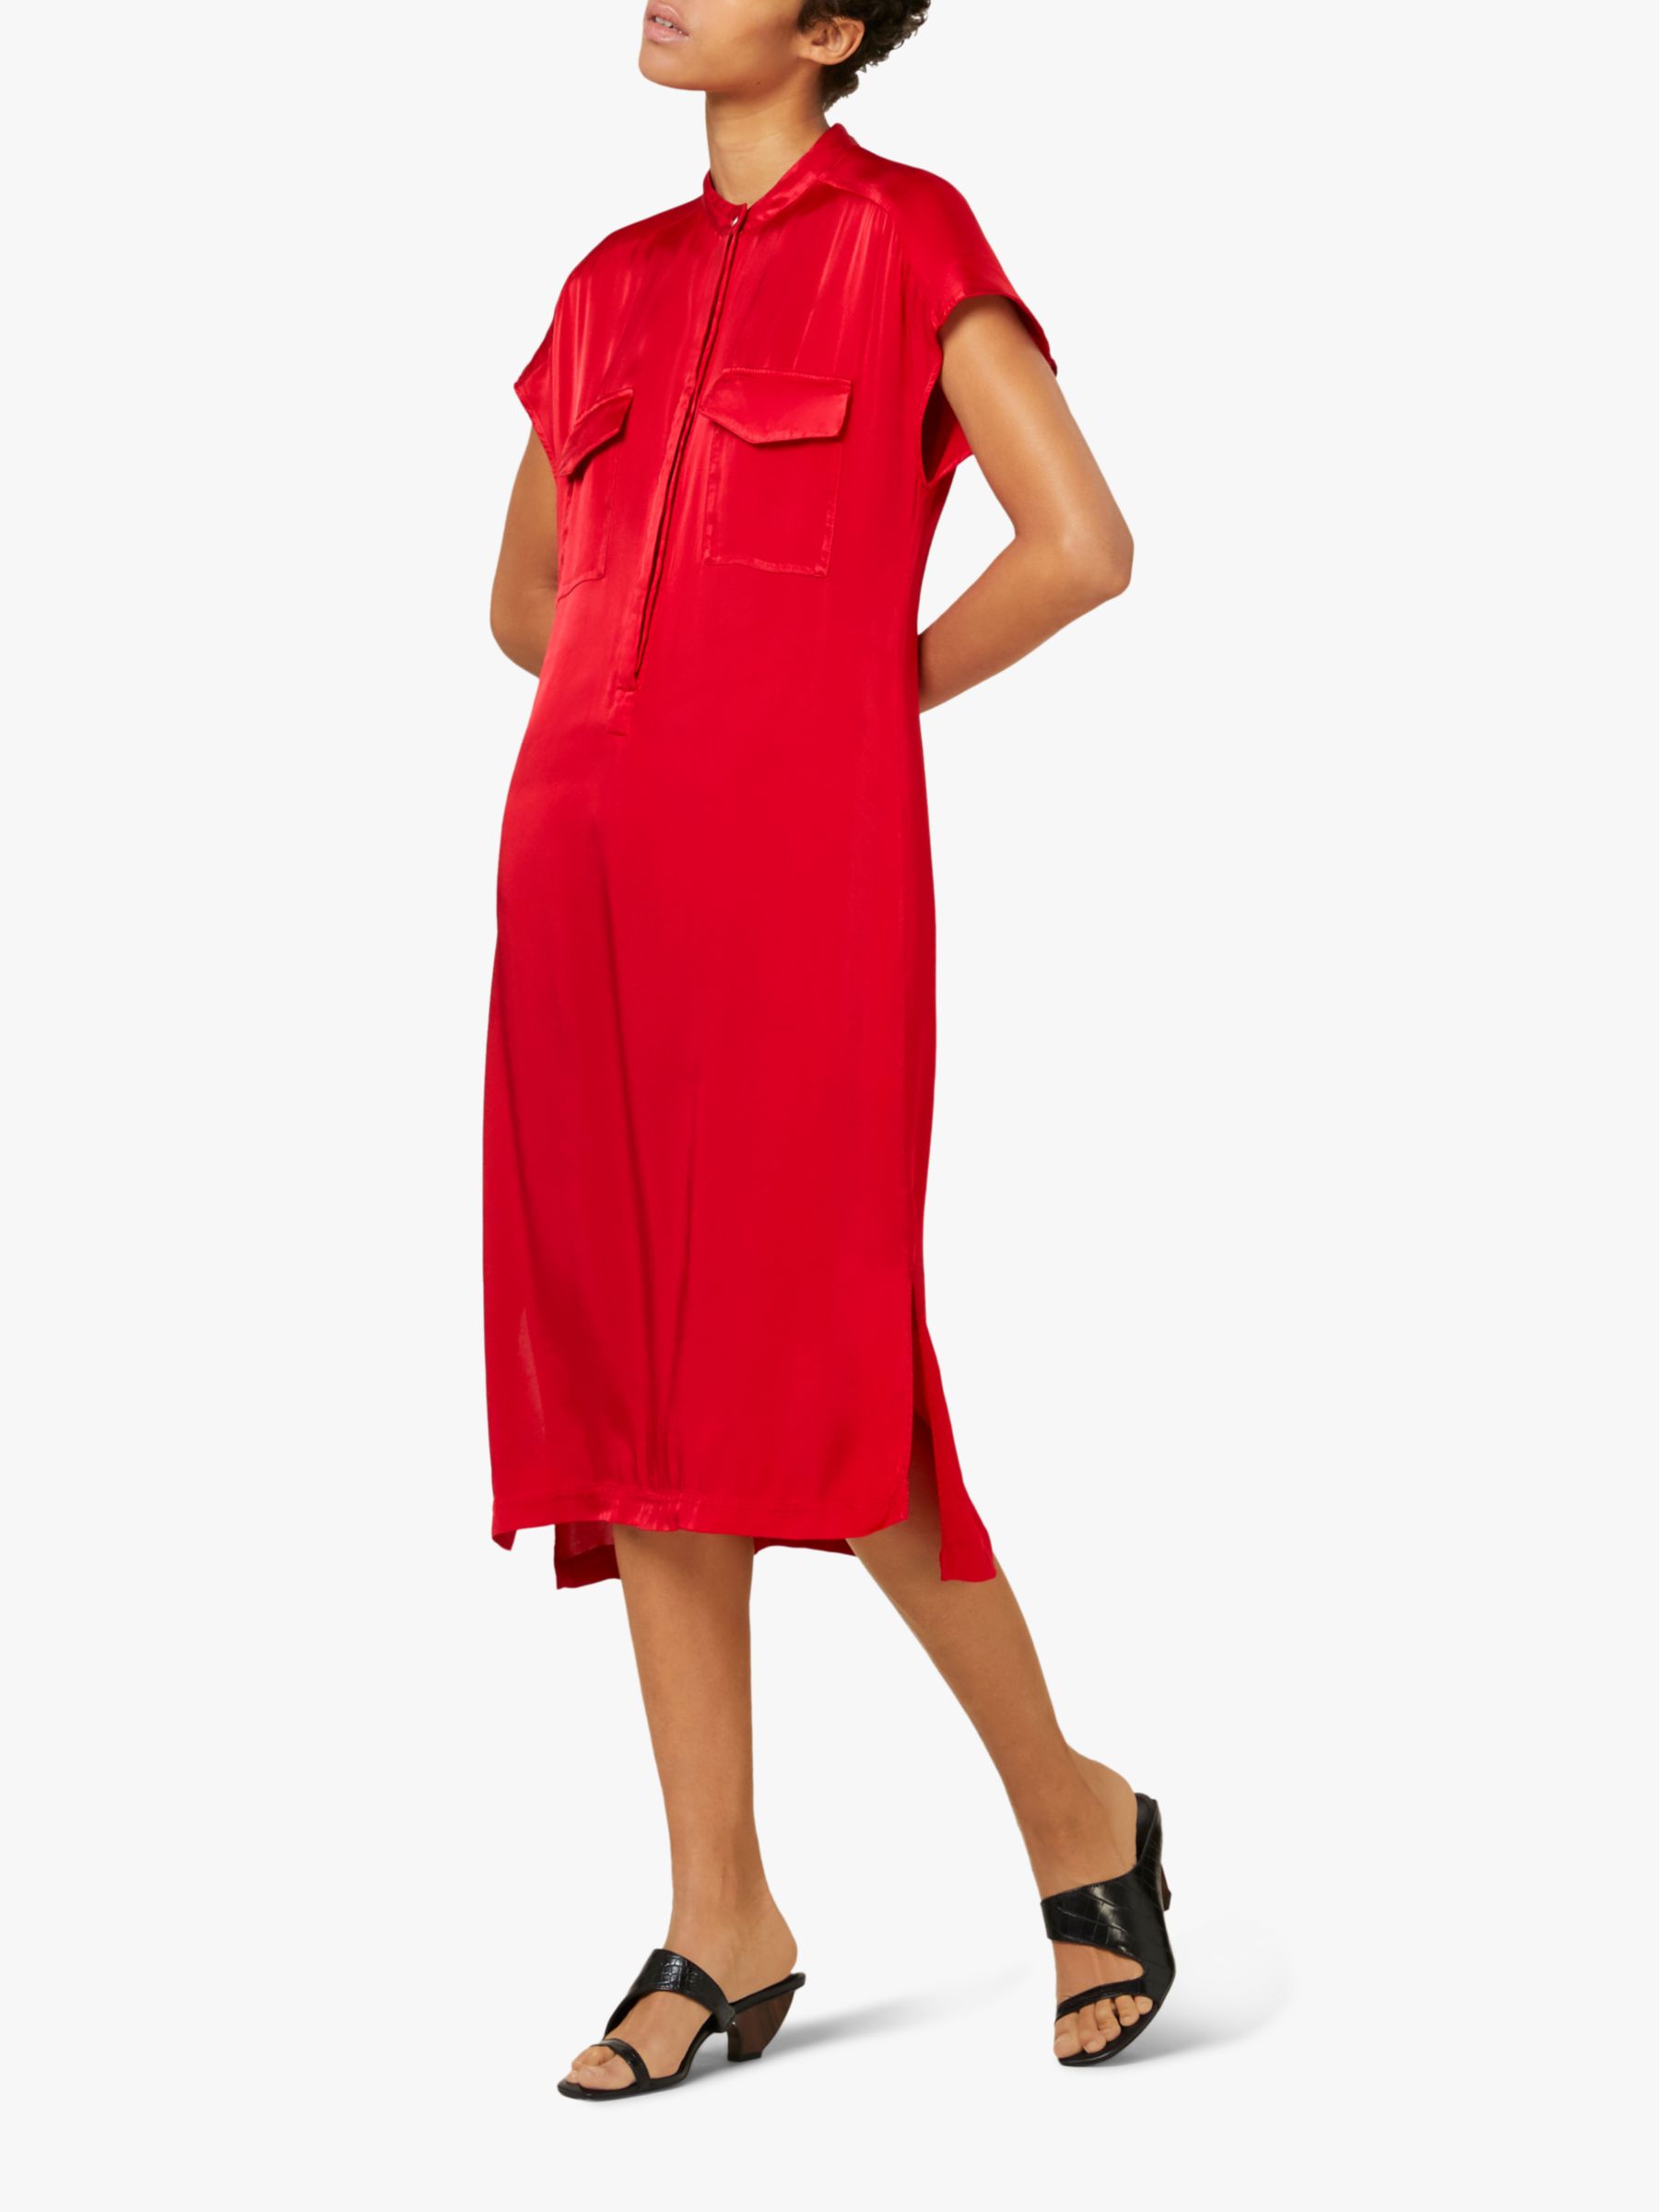 Finery Macie Dress, Red at John Lewis & Partners